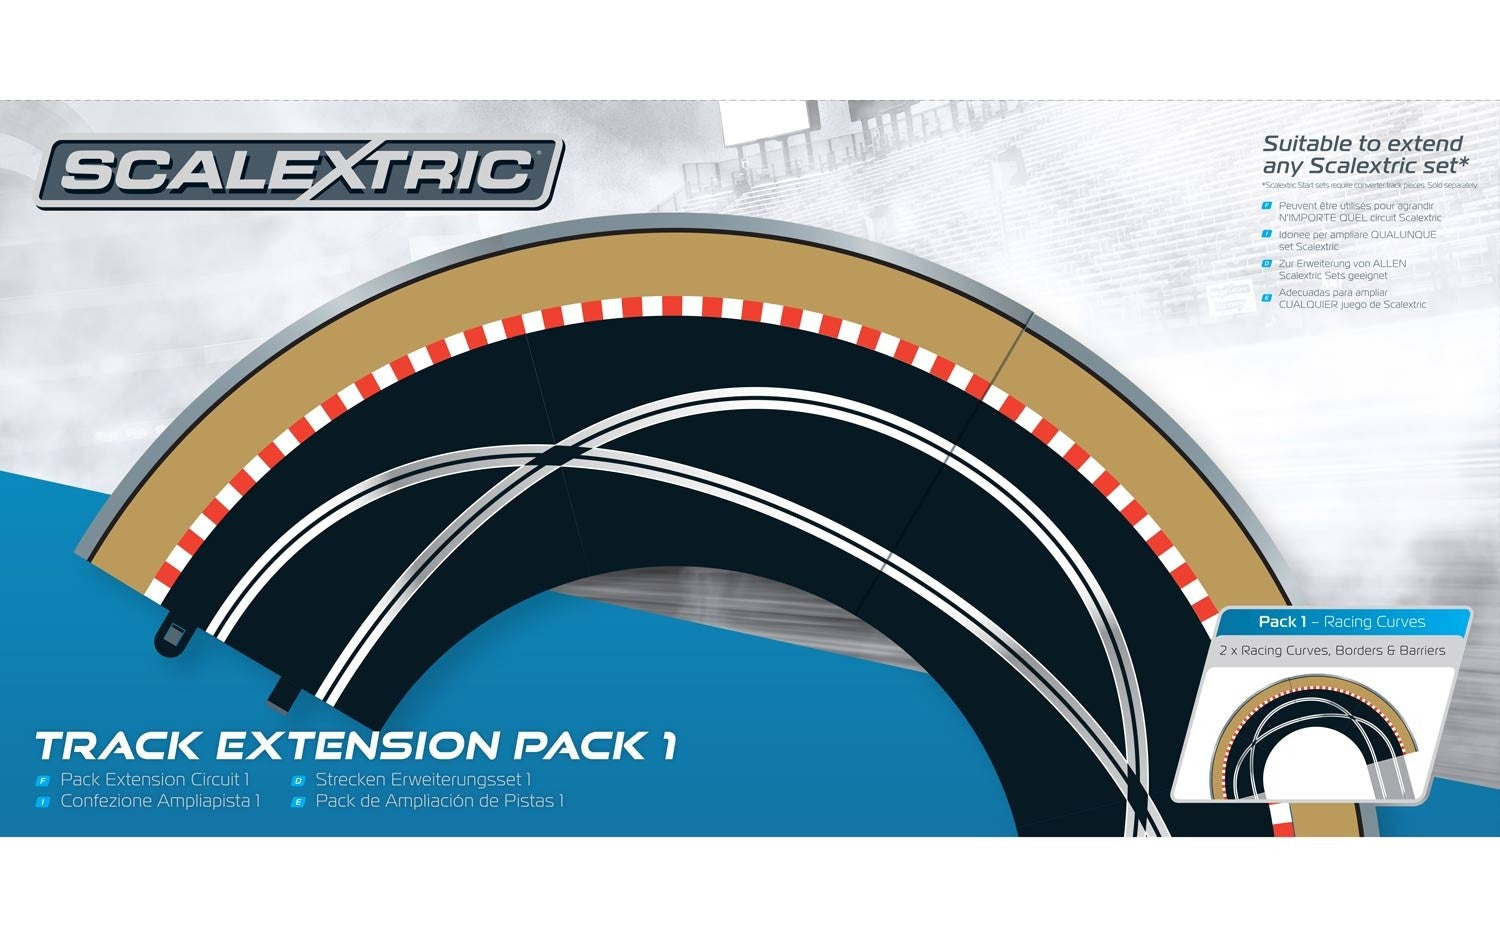 Scalextric Extension Pack Slot Car Track Set